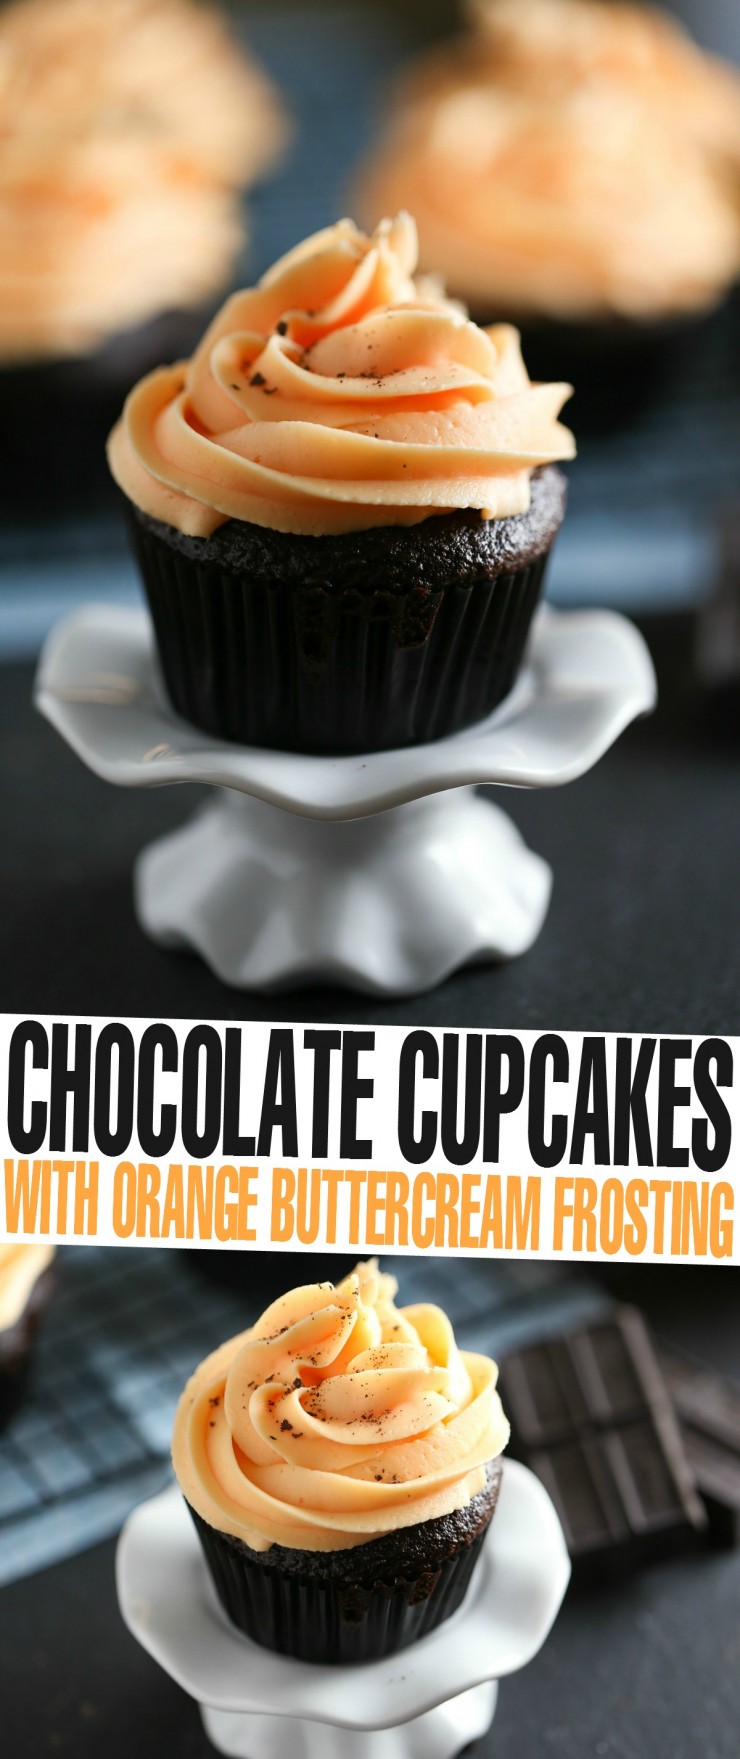 Moist and flavourful Chocolate Cupcakes topped with bright Orange Buttercream Frosting.